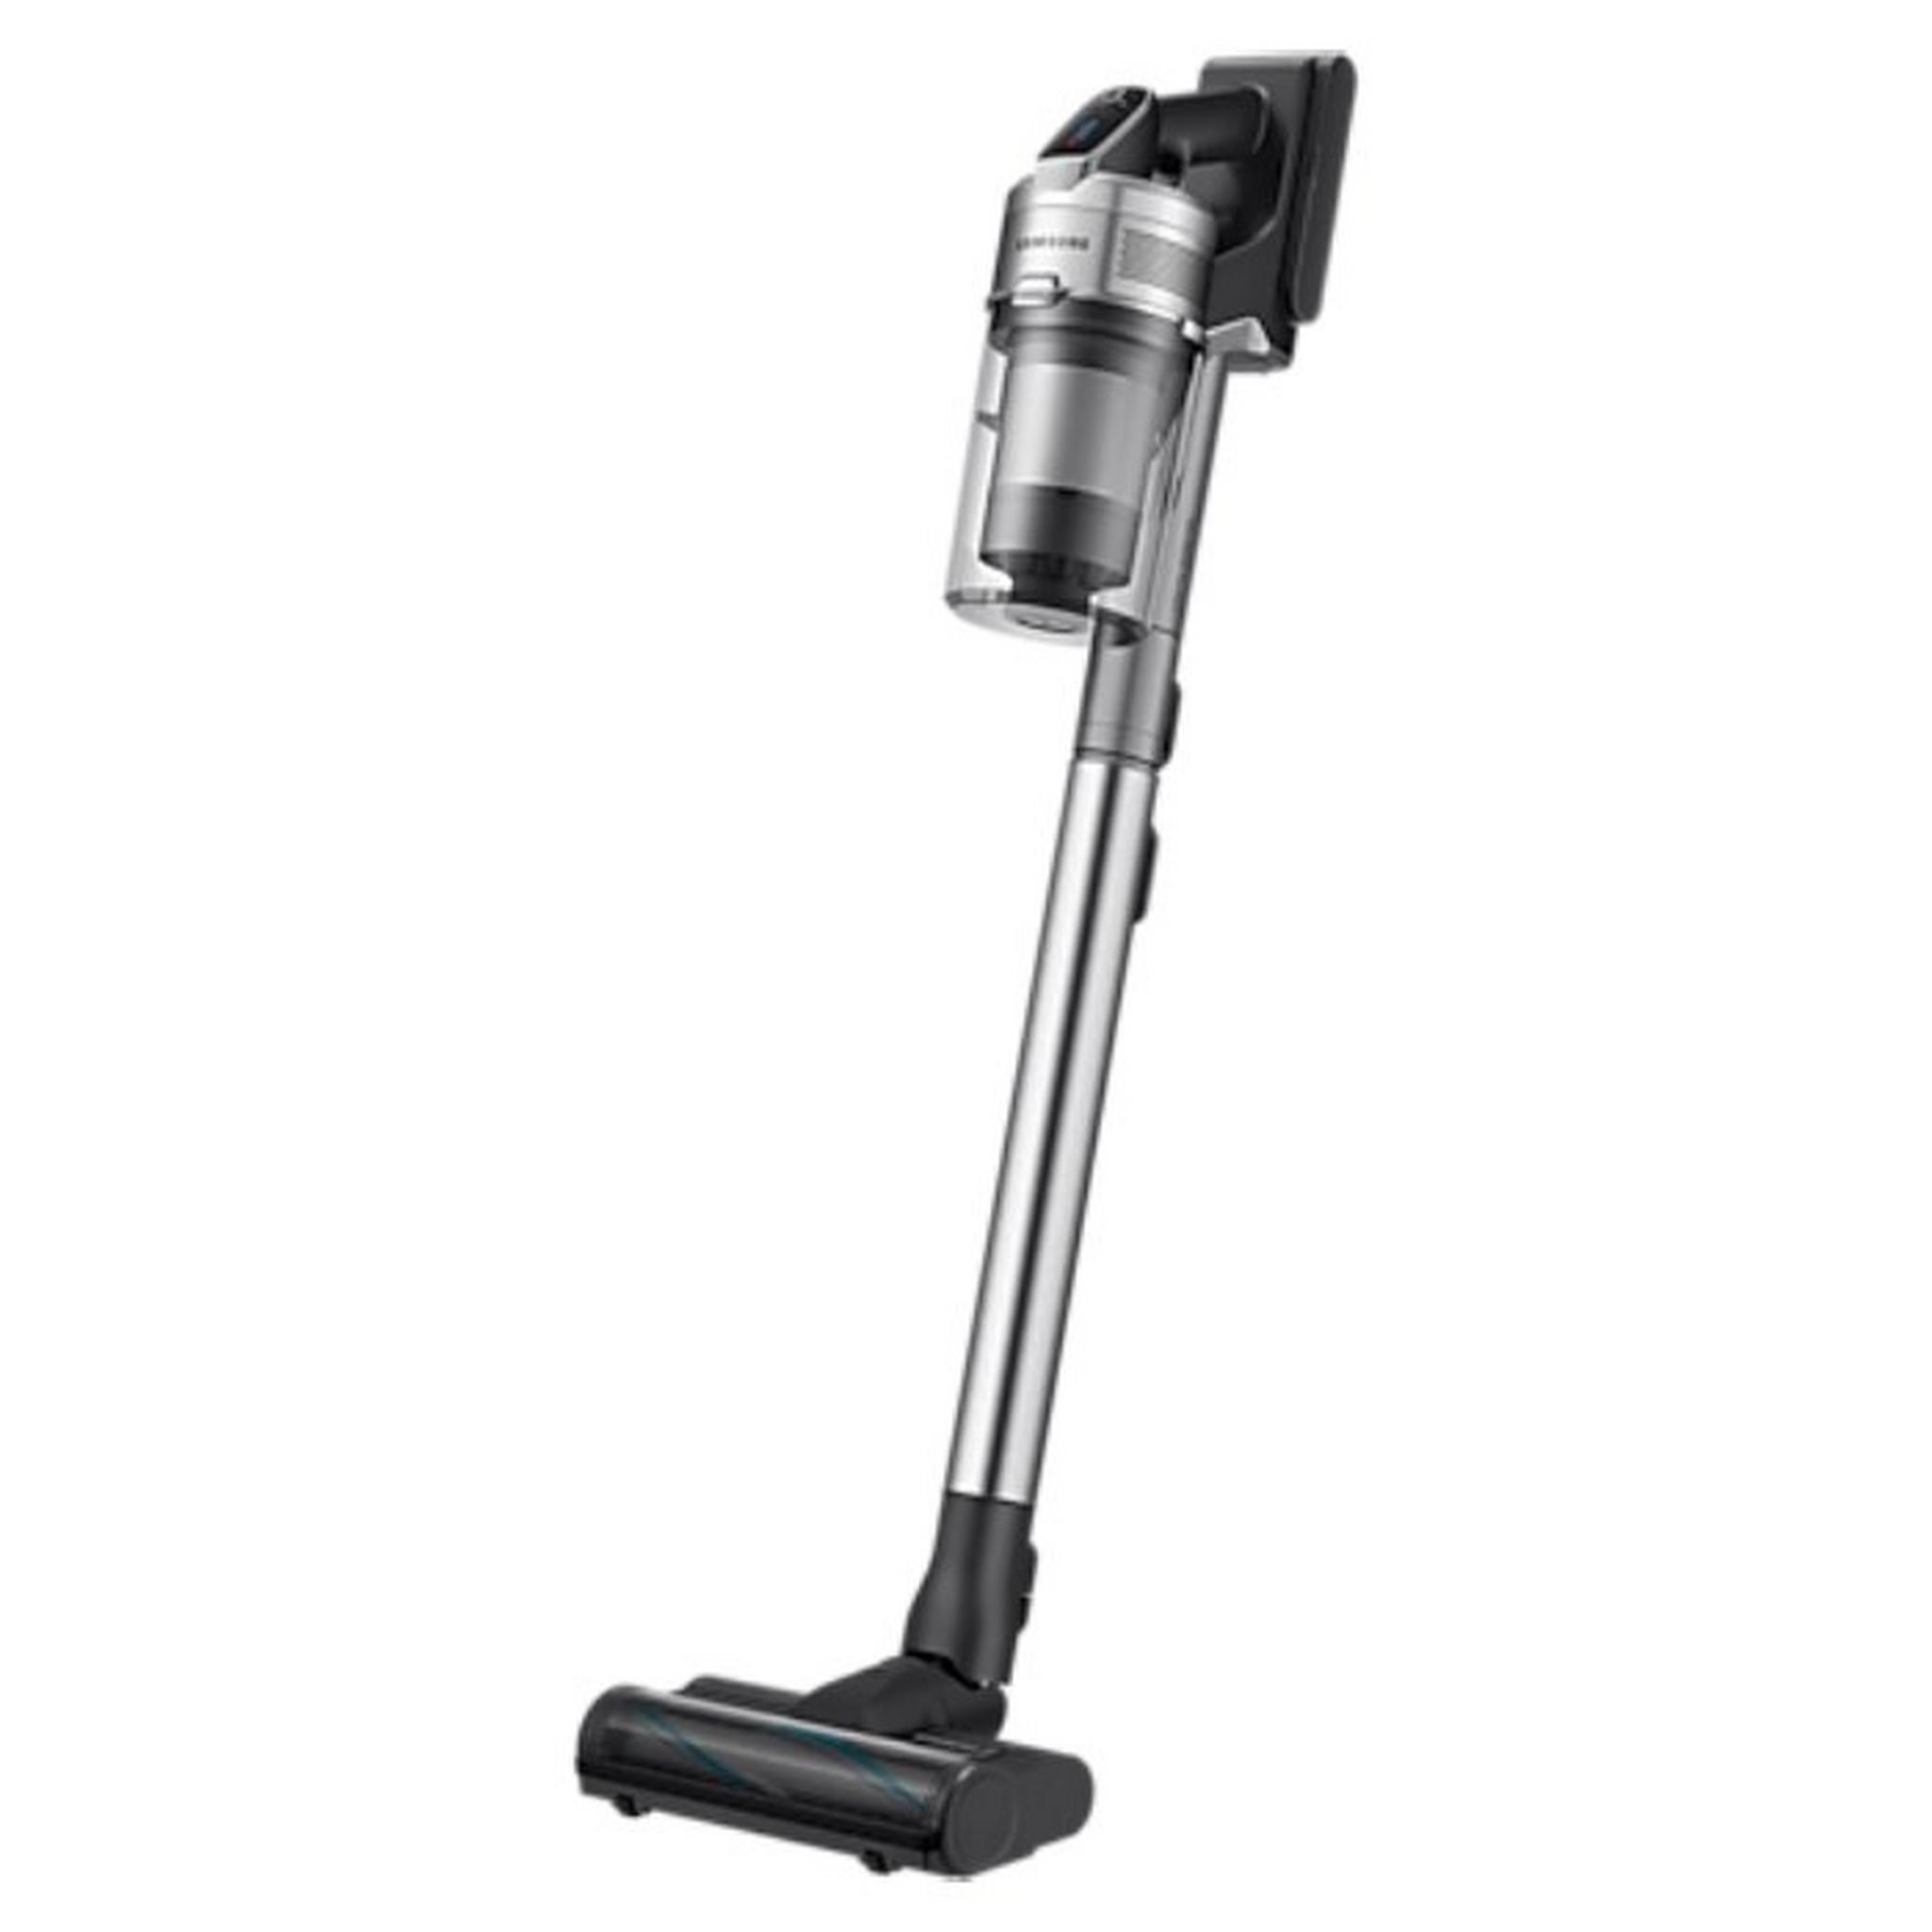 Samsung Jet 90 Complete Cordless With Flexible Pipe Vacuum (VS20R9046S3)